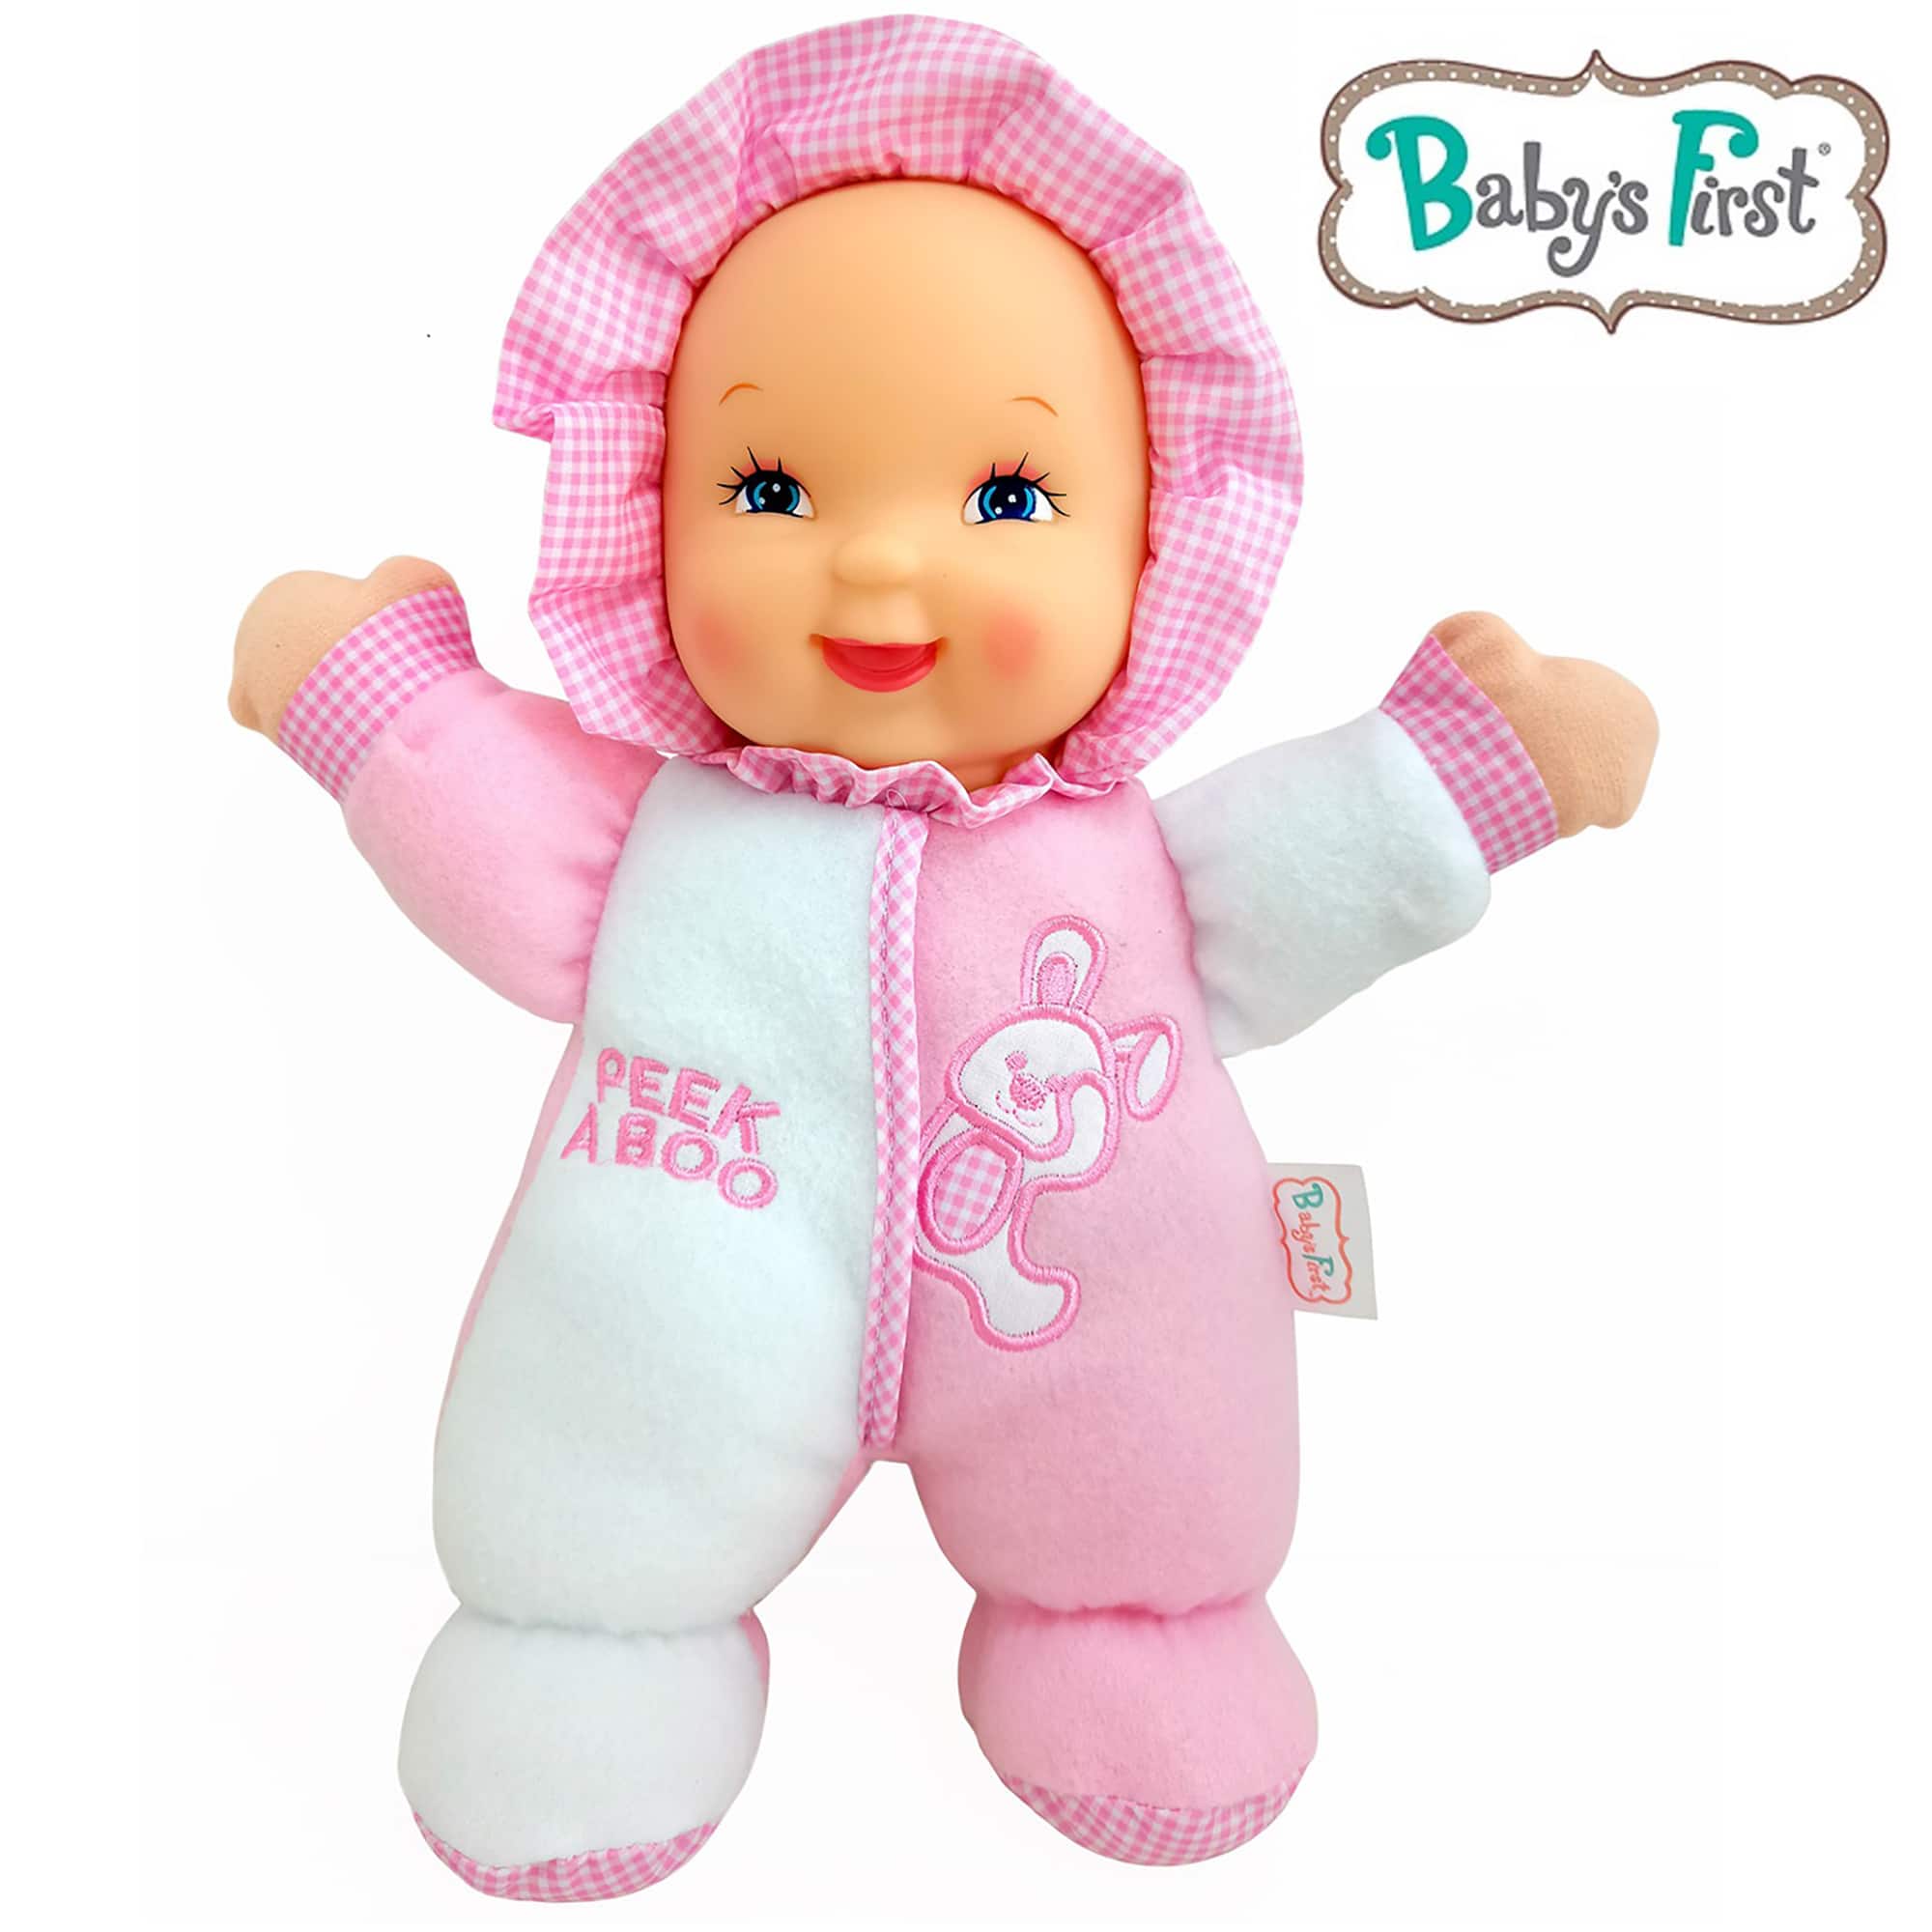 Goldberger Baby&#x27;s First Soft &#x26; Snuggle Bunny Toy Doll